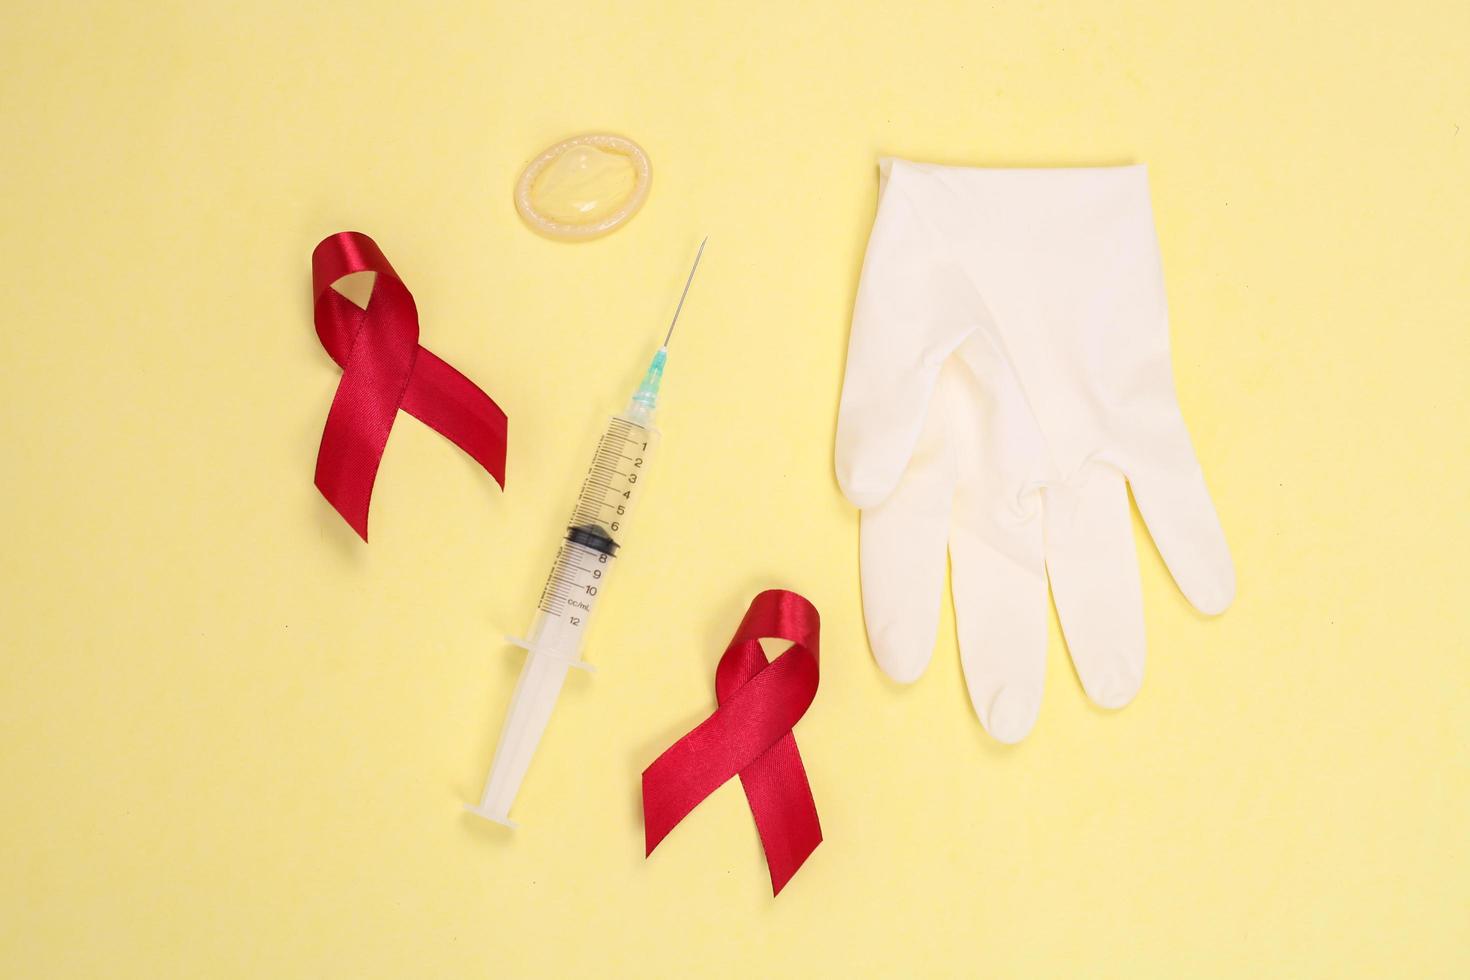 red ribbon and medical device symbol against HIV isolated on yellow background photo